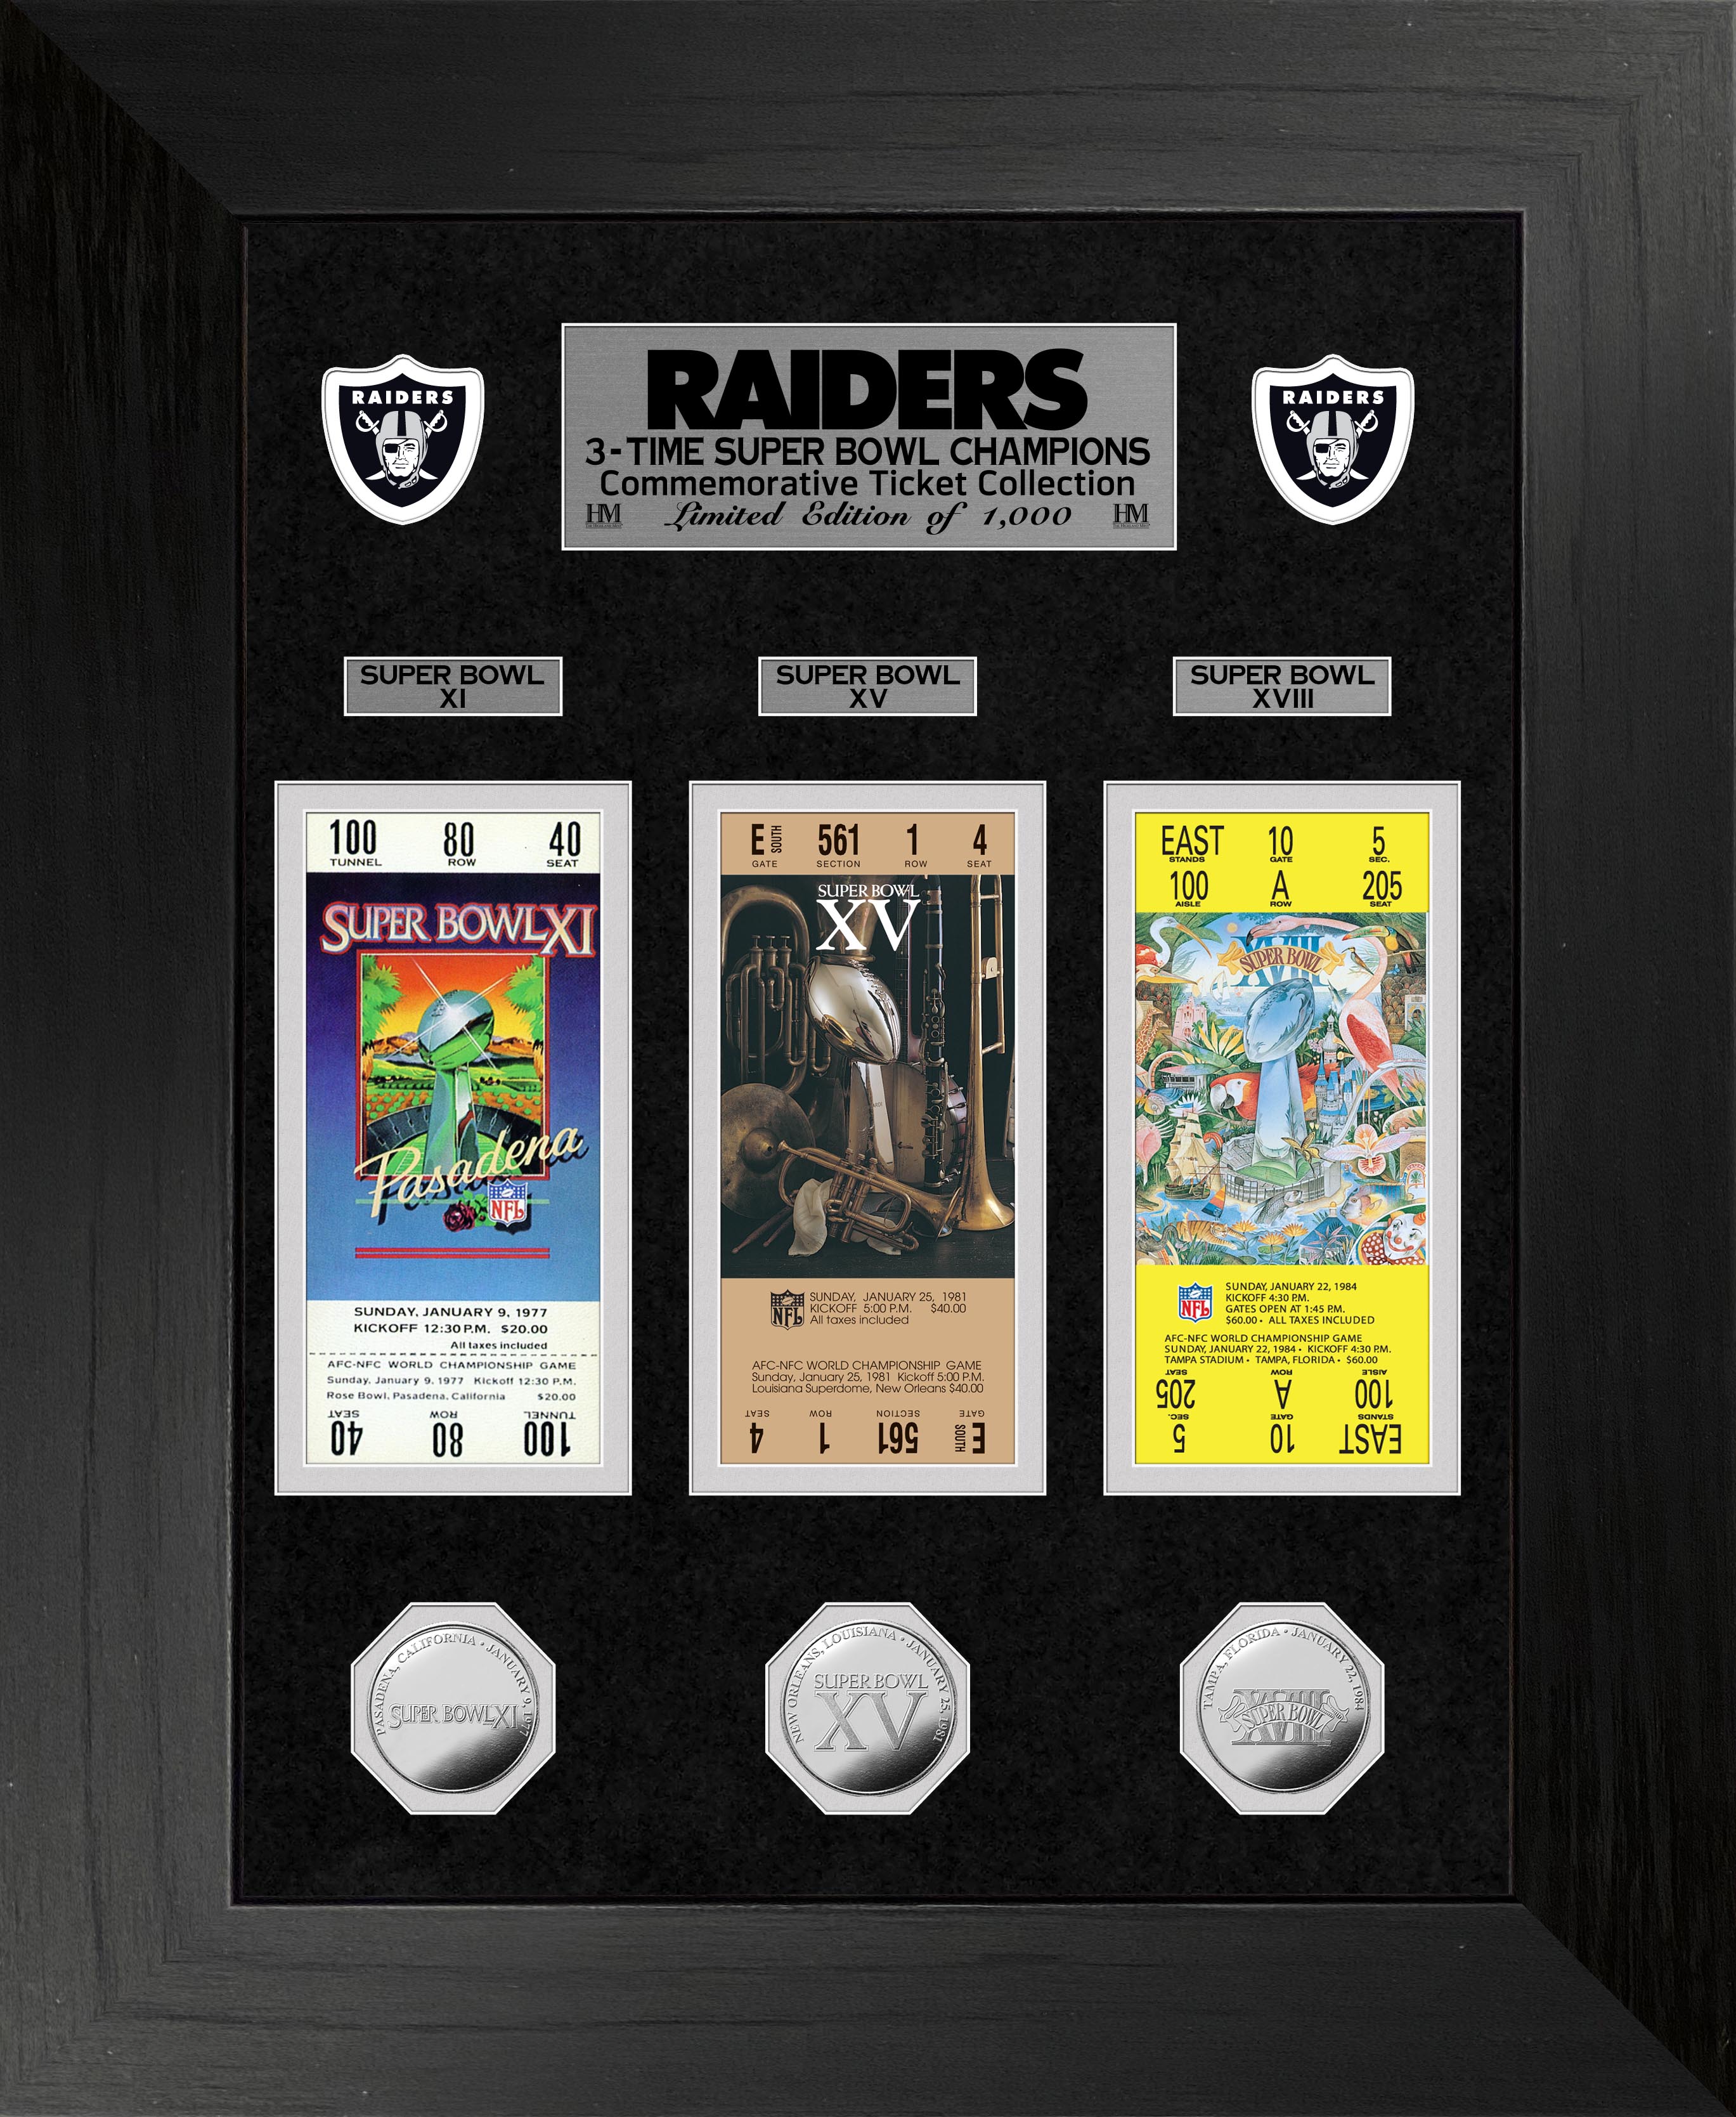 Raiders 3-Time Super Bowl Champions Silver Coin & Ticket Collection